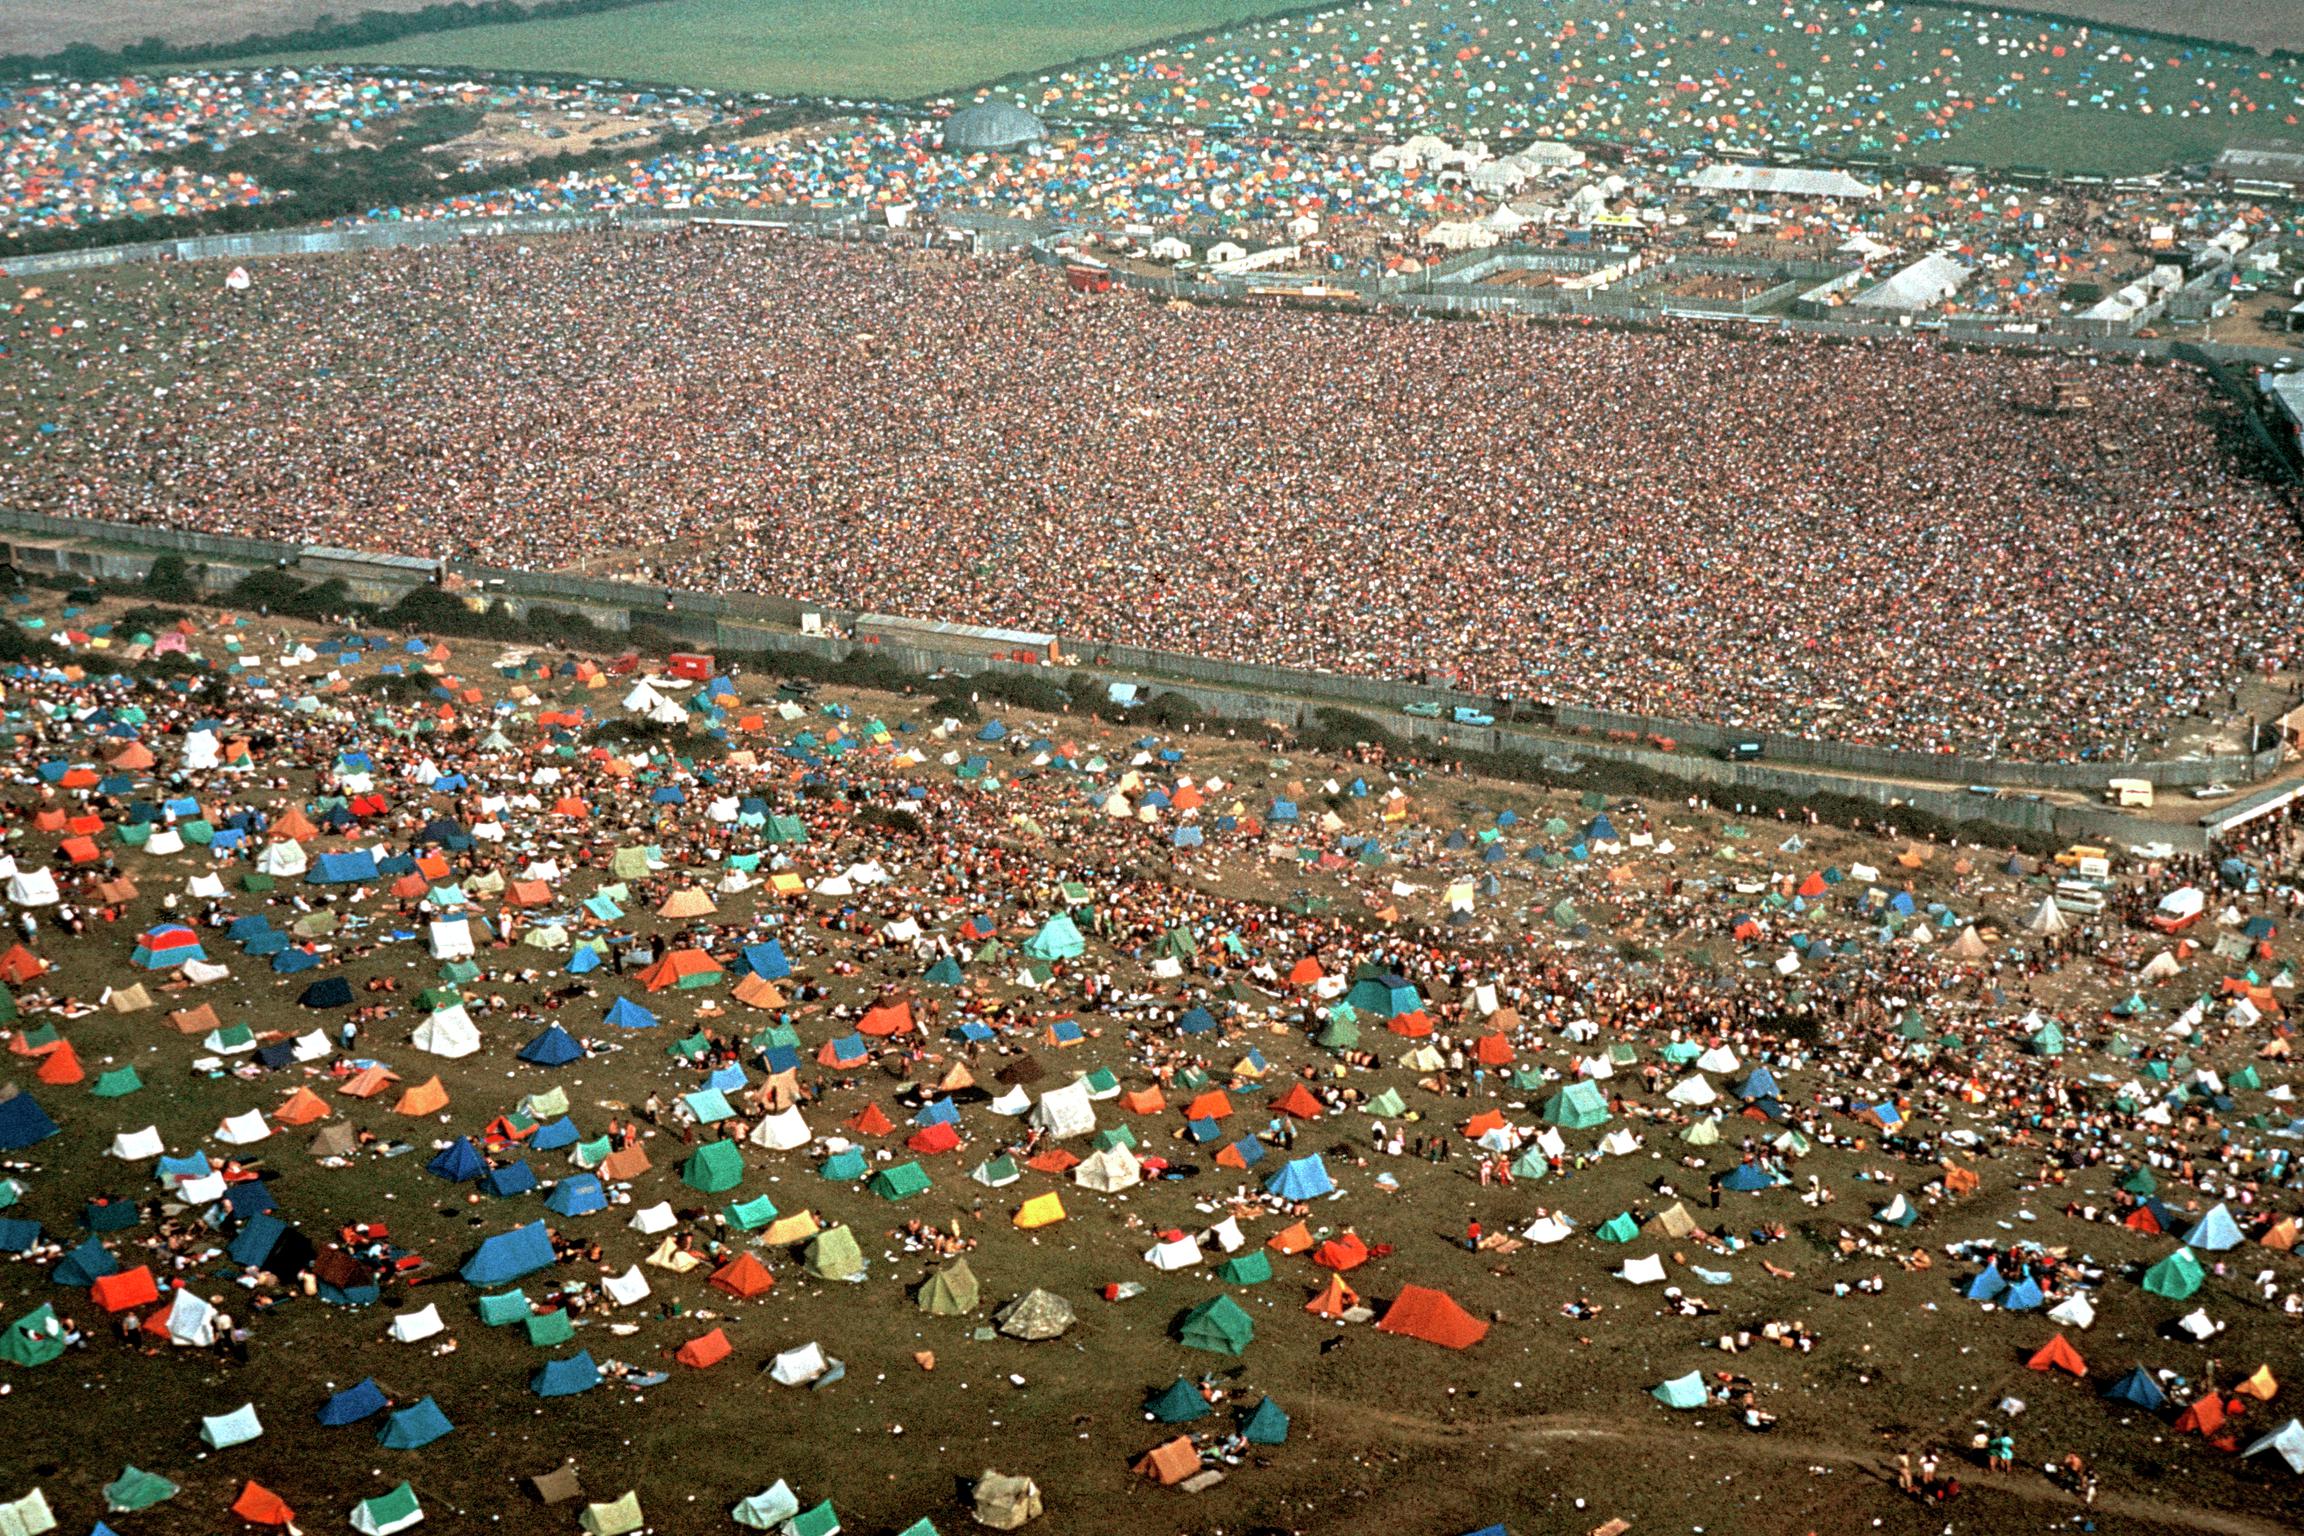 Isle of Wight Festival. Pop concert - known as the Bob Dylan concert